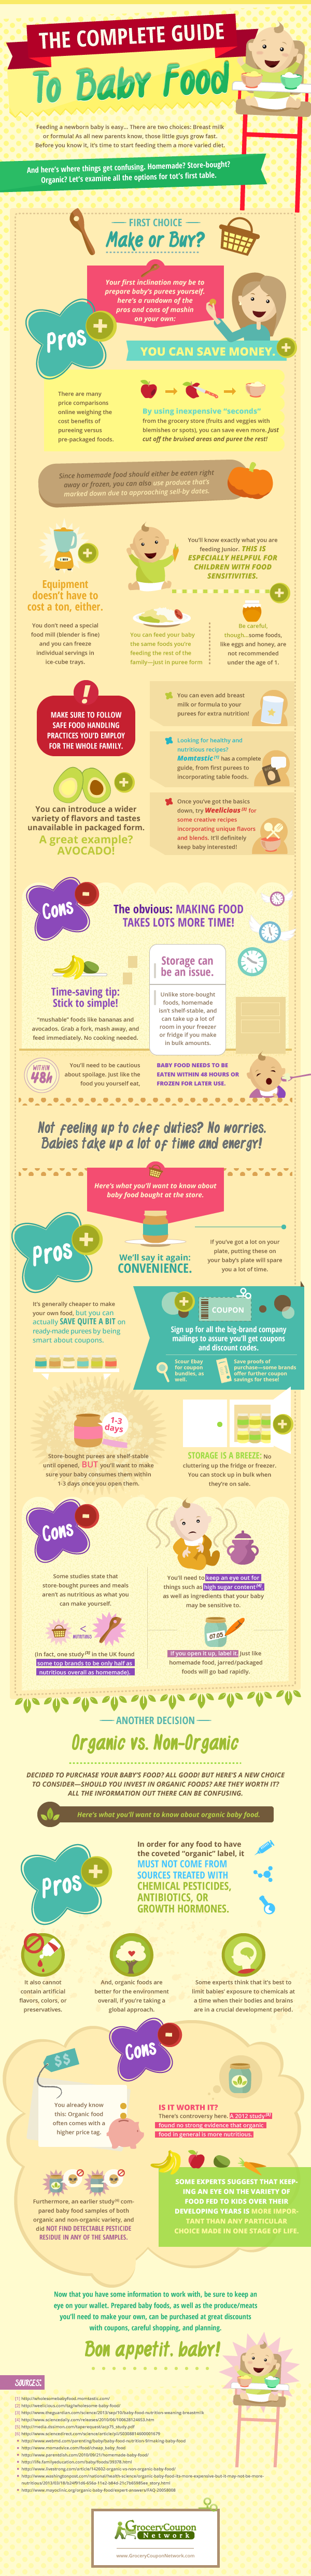 Parents’ Complete Guide to Baby Food